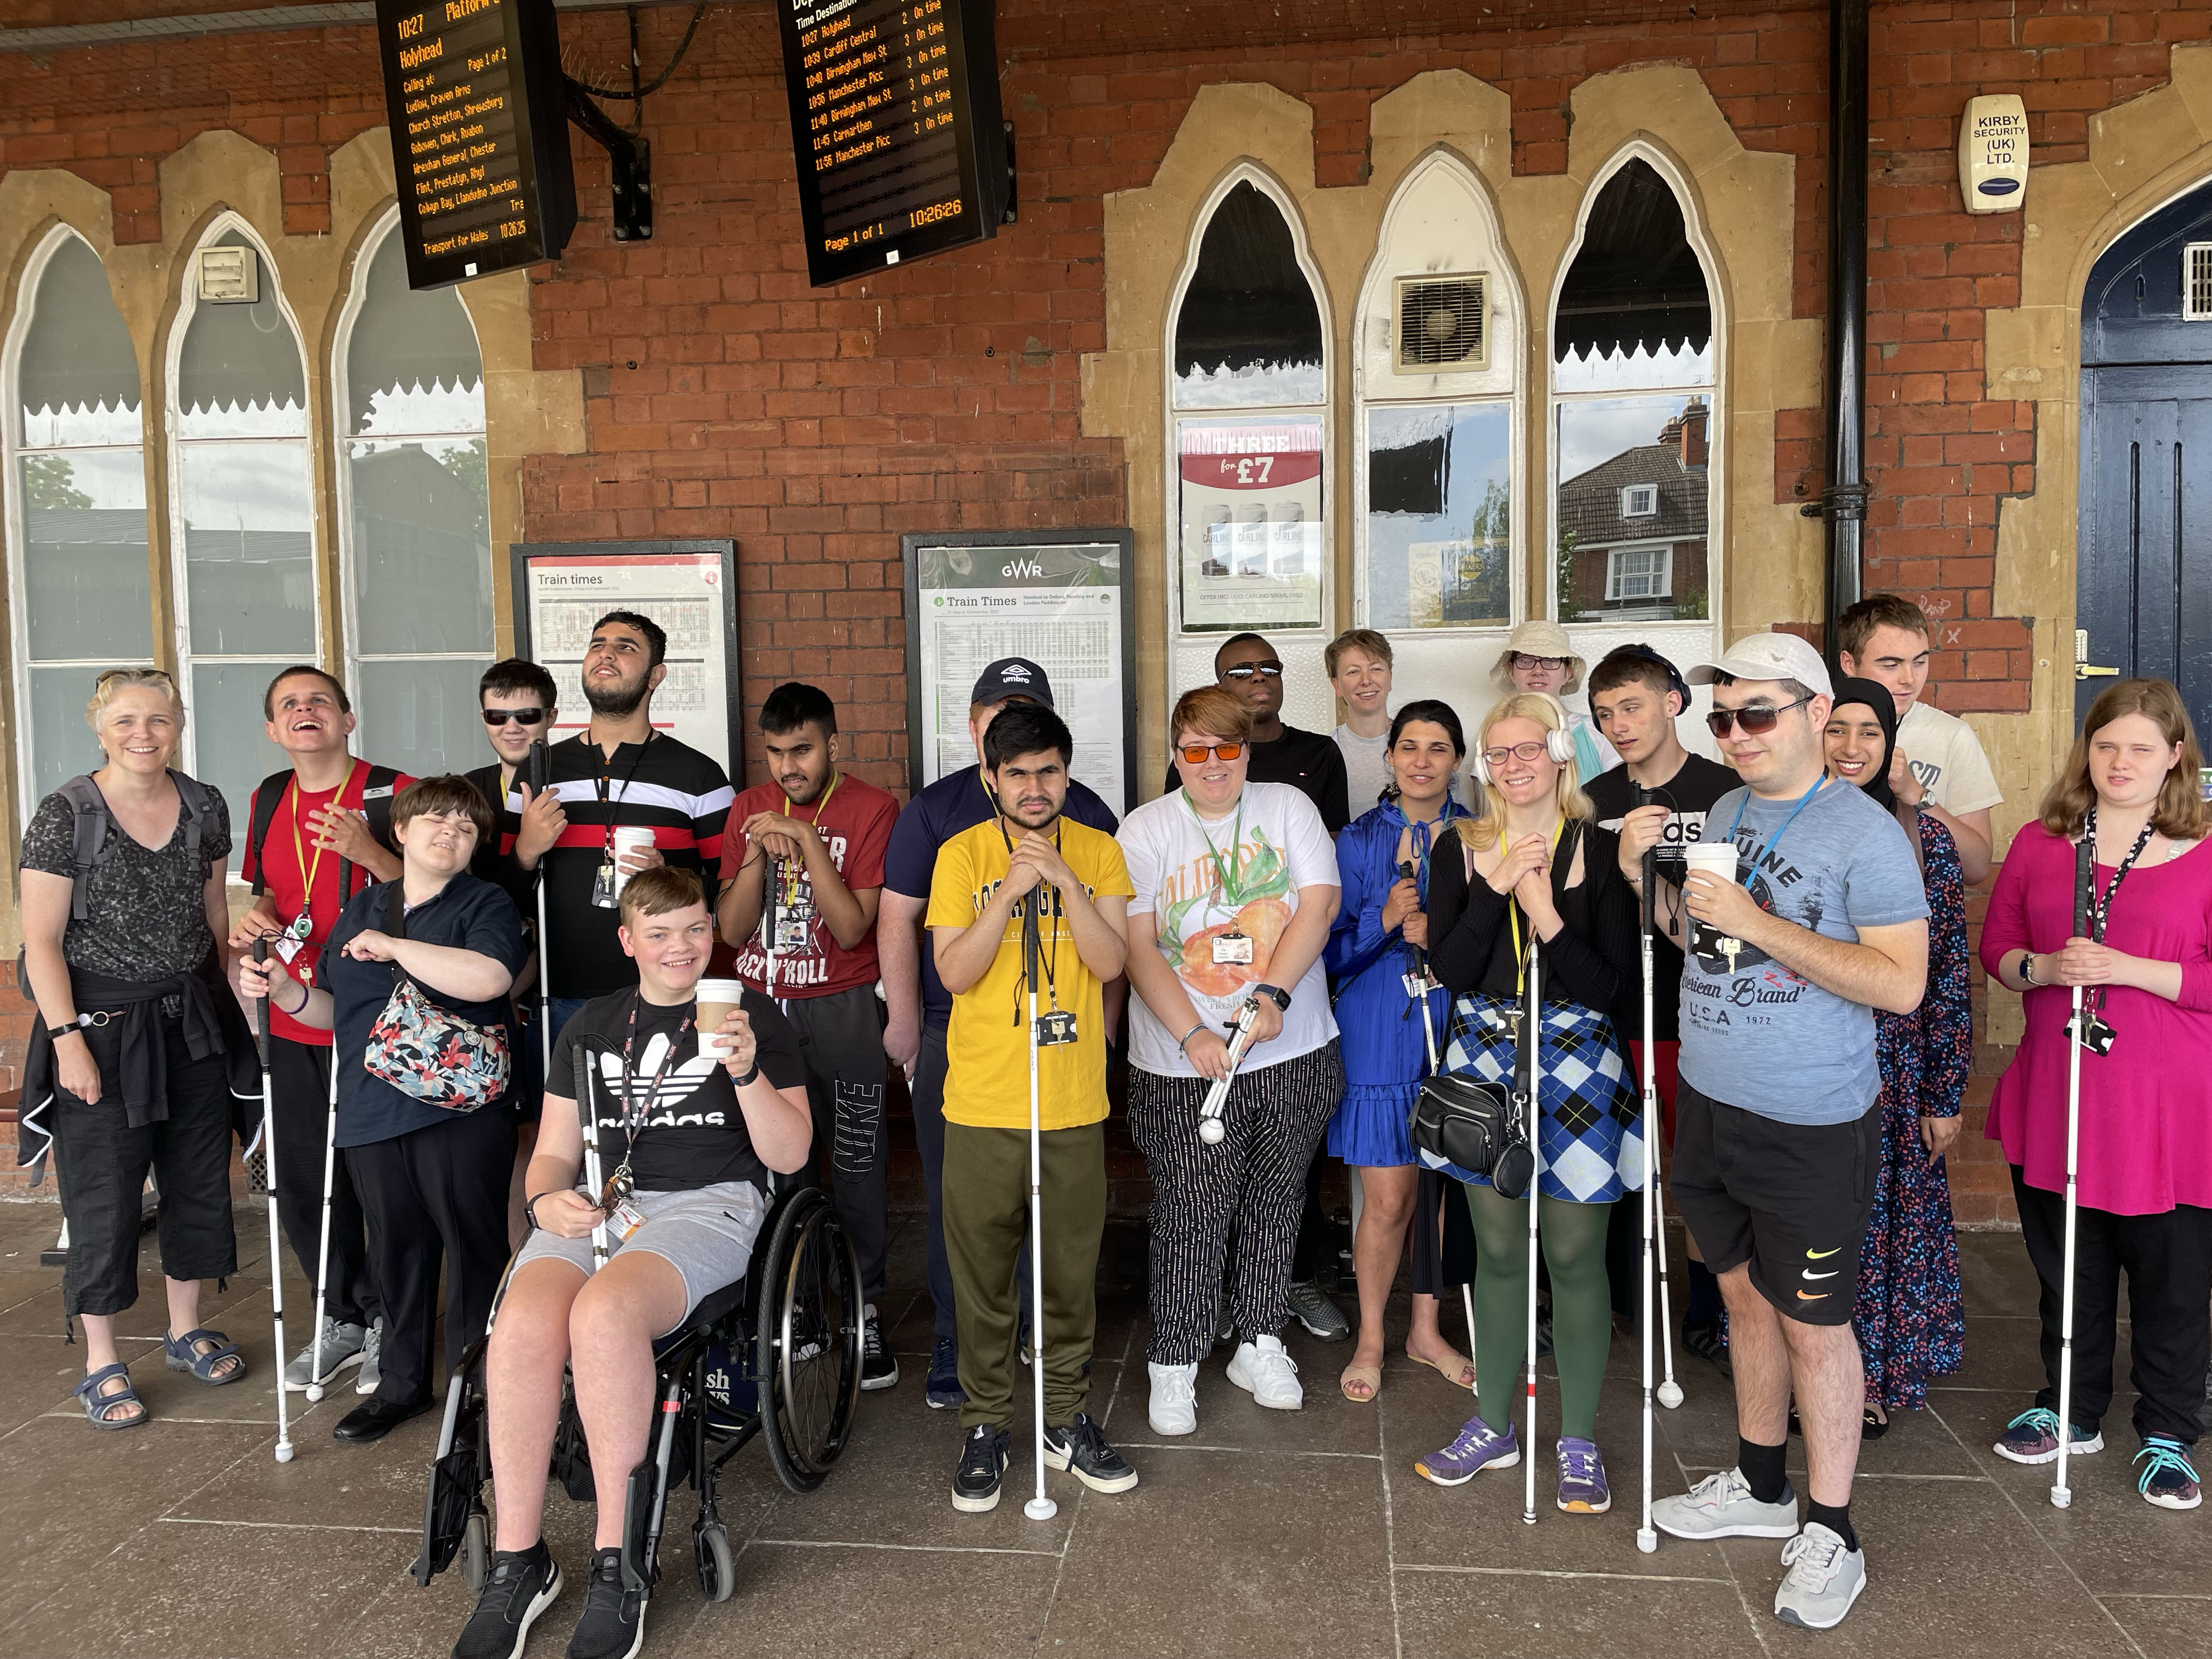 The group of staff and students standing outside Hereford Railway Station